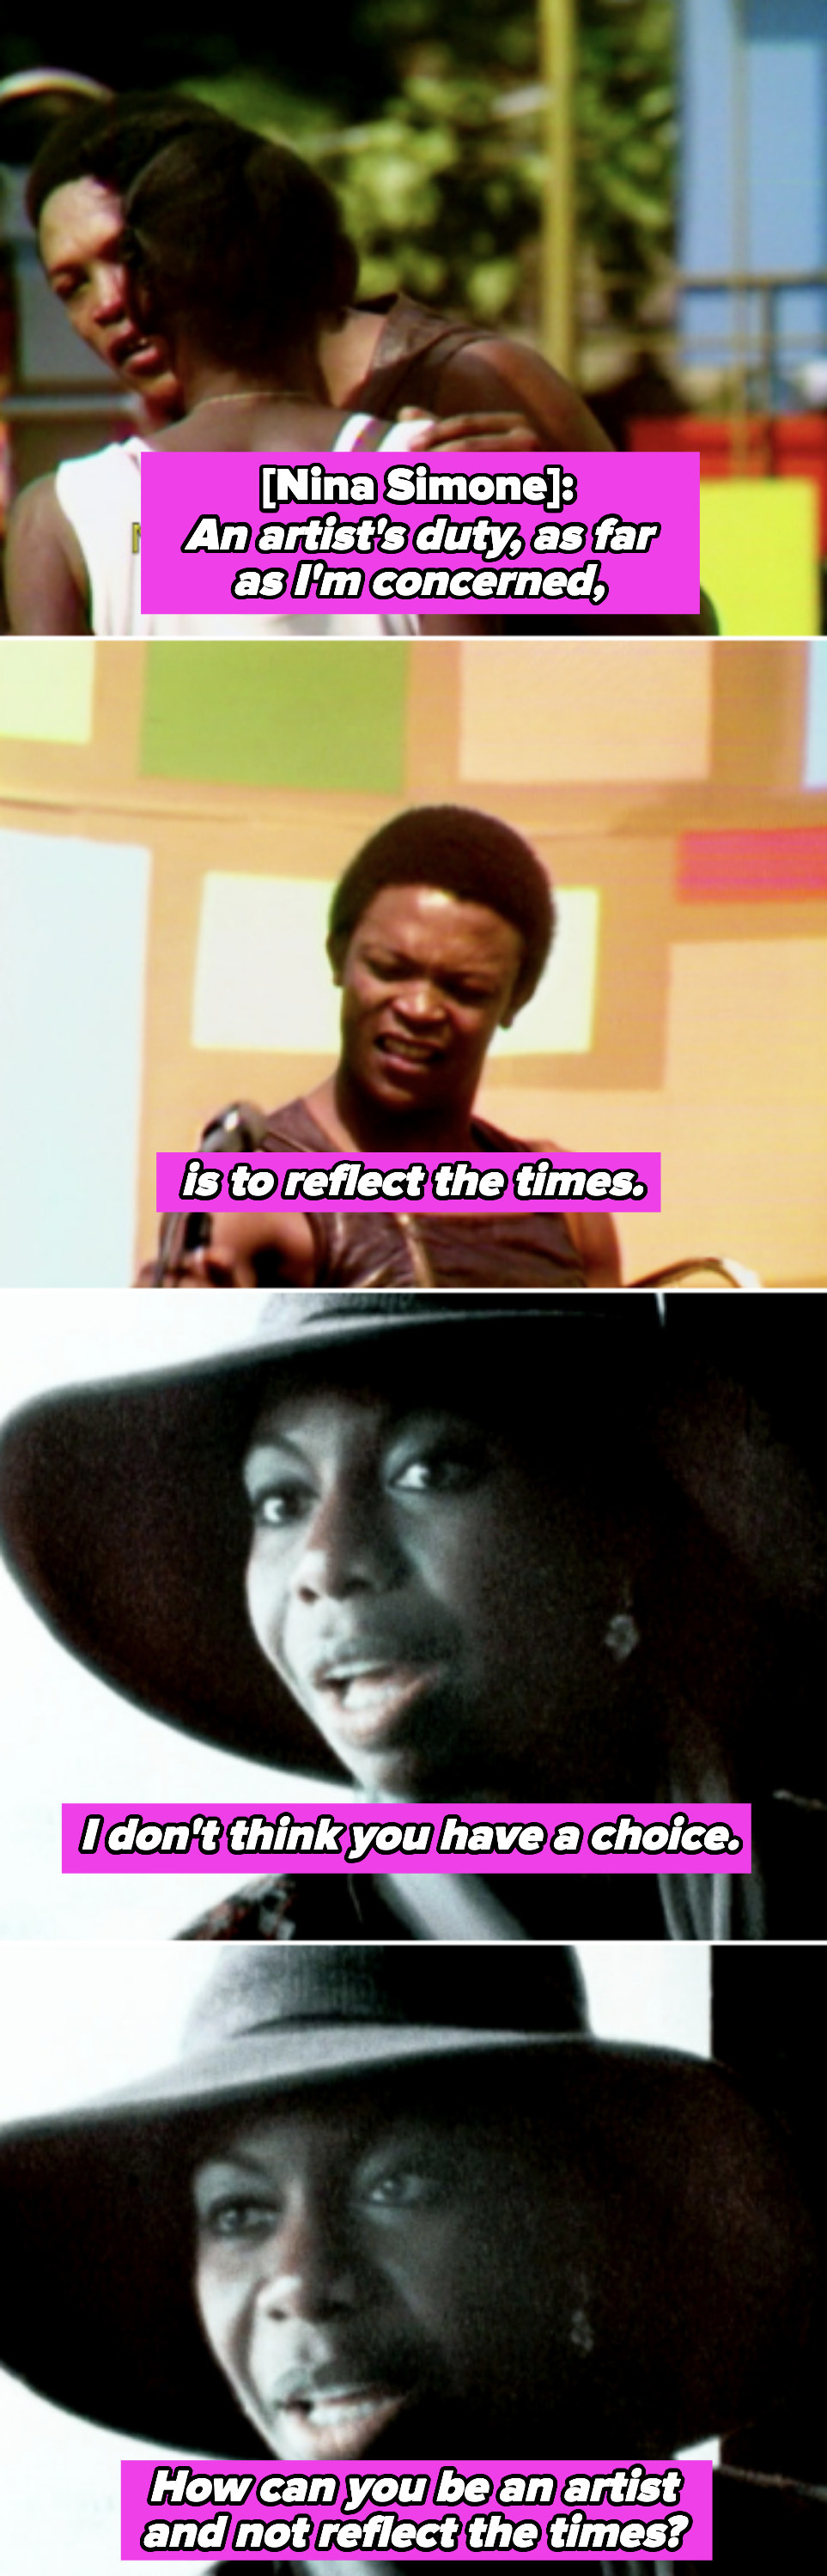 Nina Simone: &quot;How can you be an artist and not reflect the times?&quot;